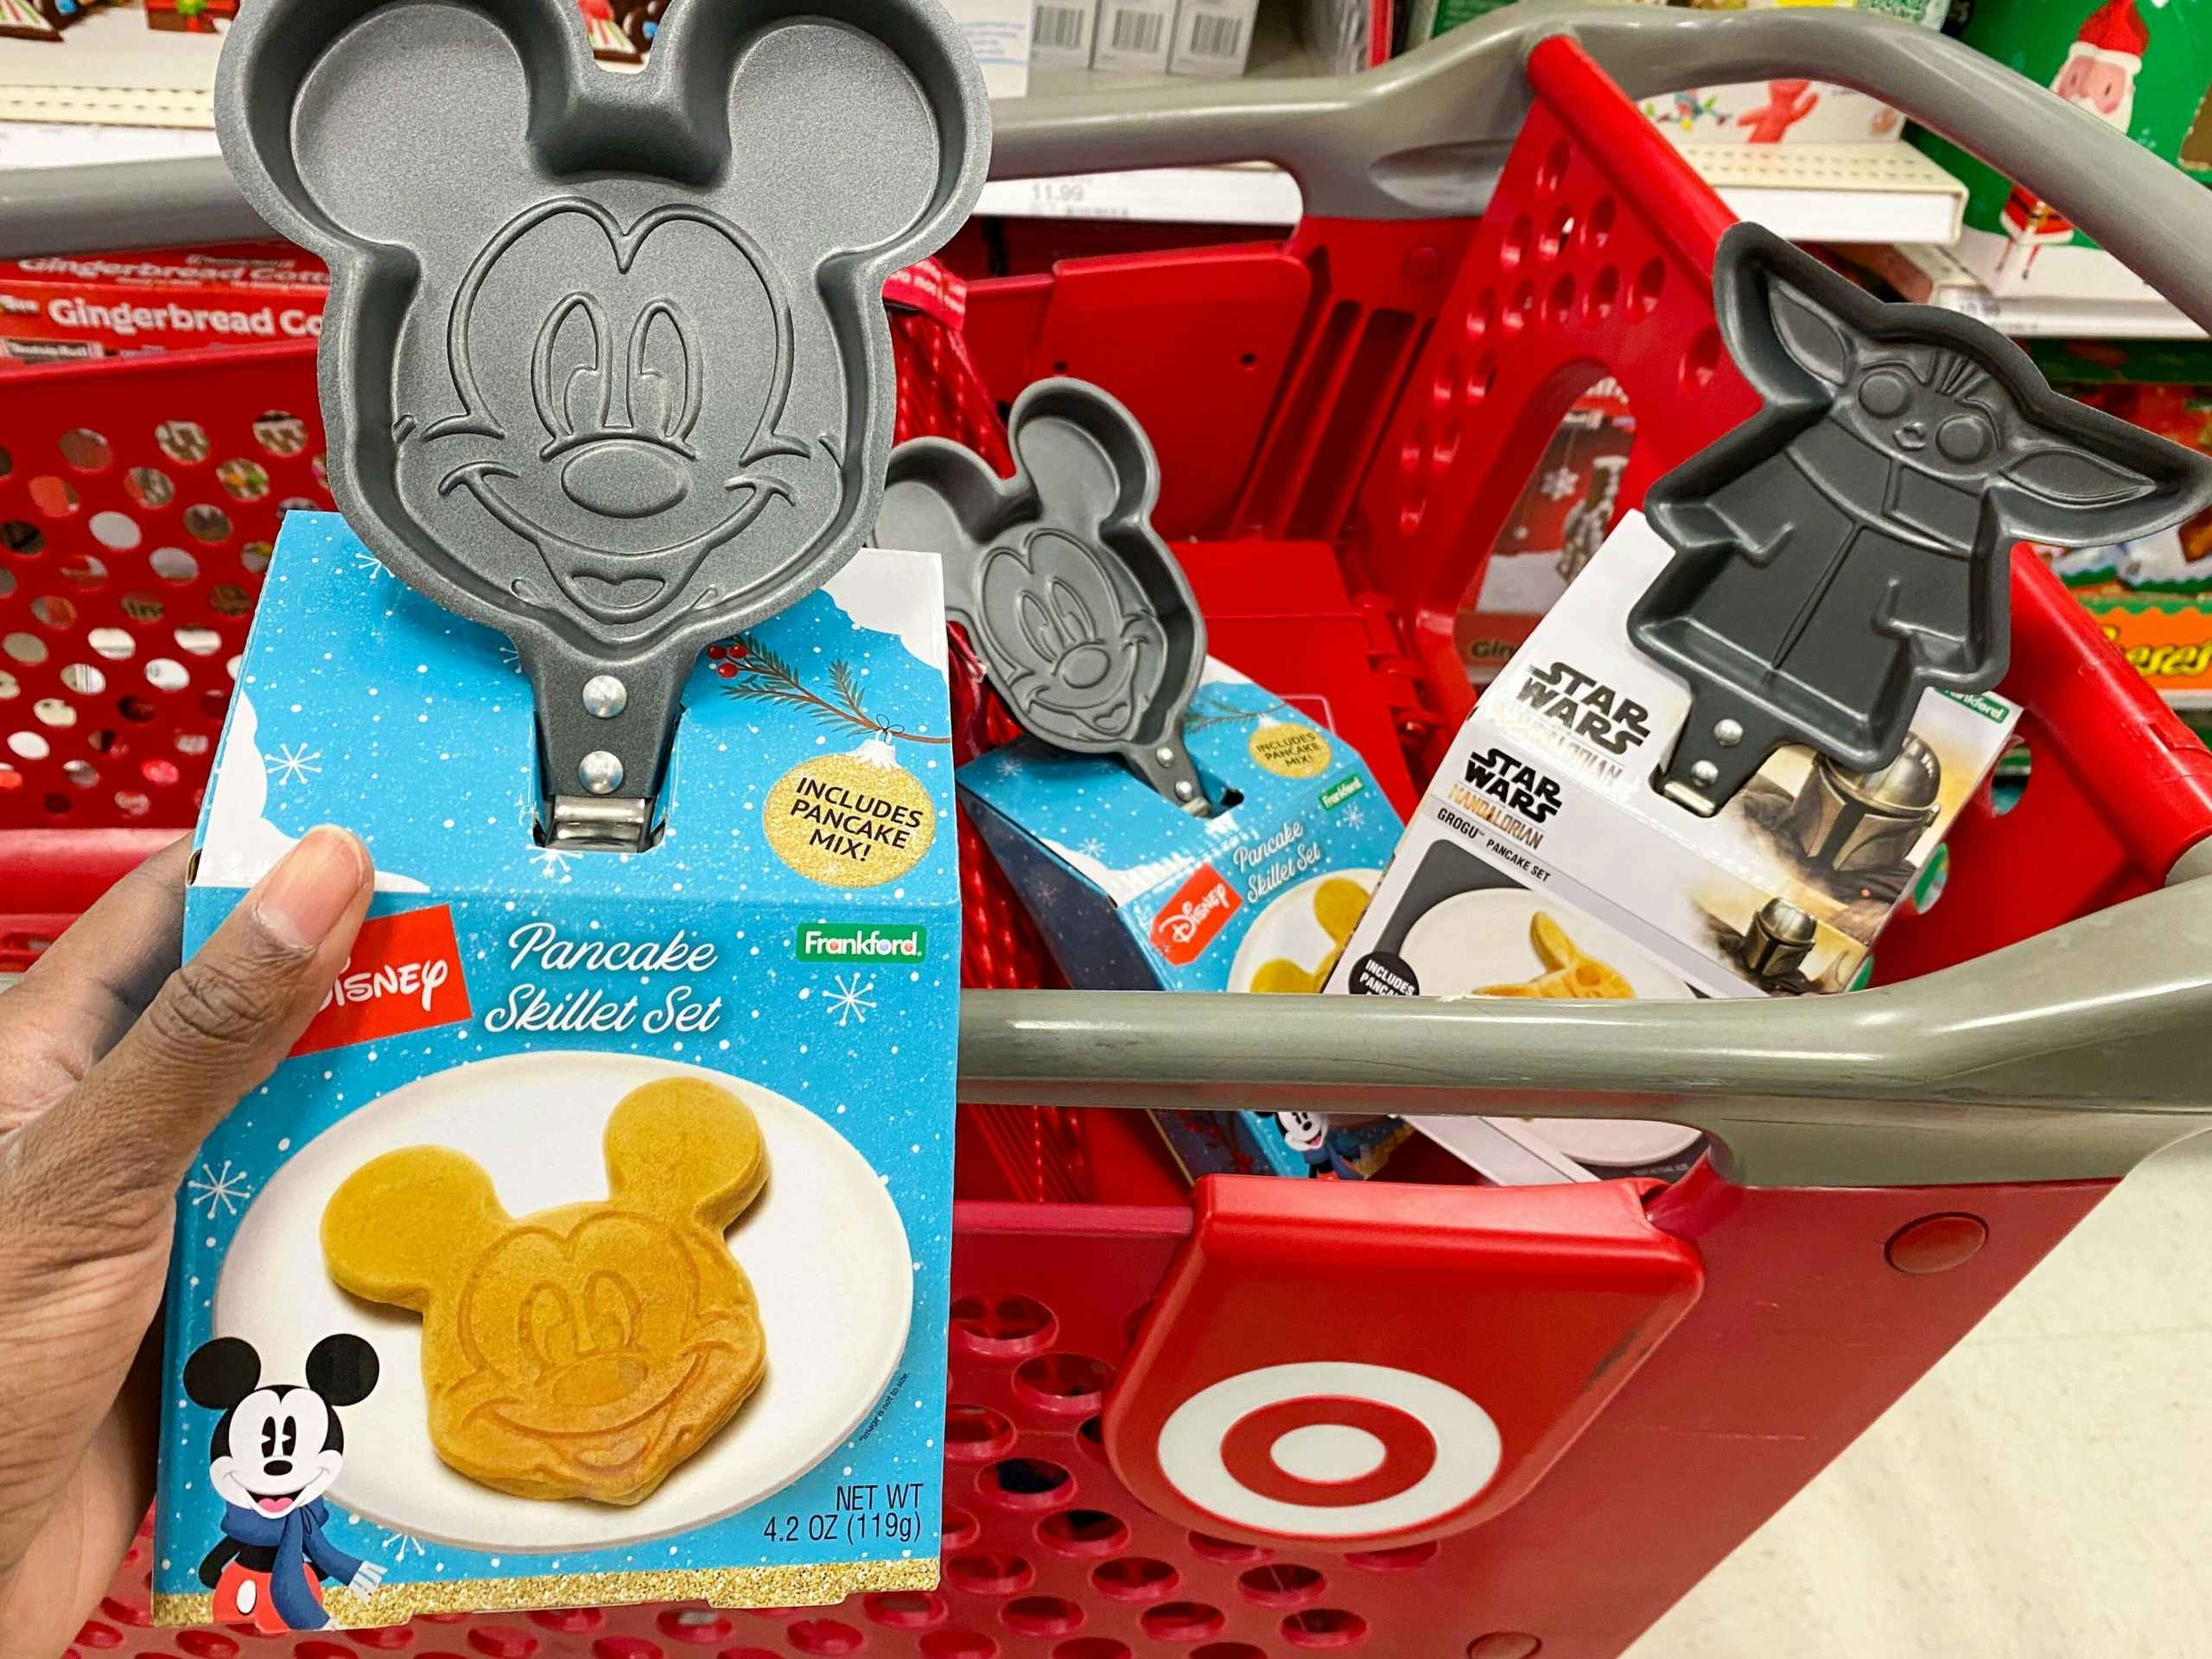 baby yoda and mickey mouse pancake skillet gift set in a target cart